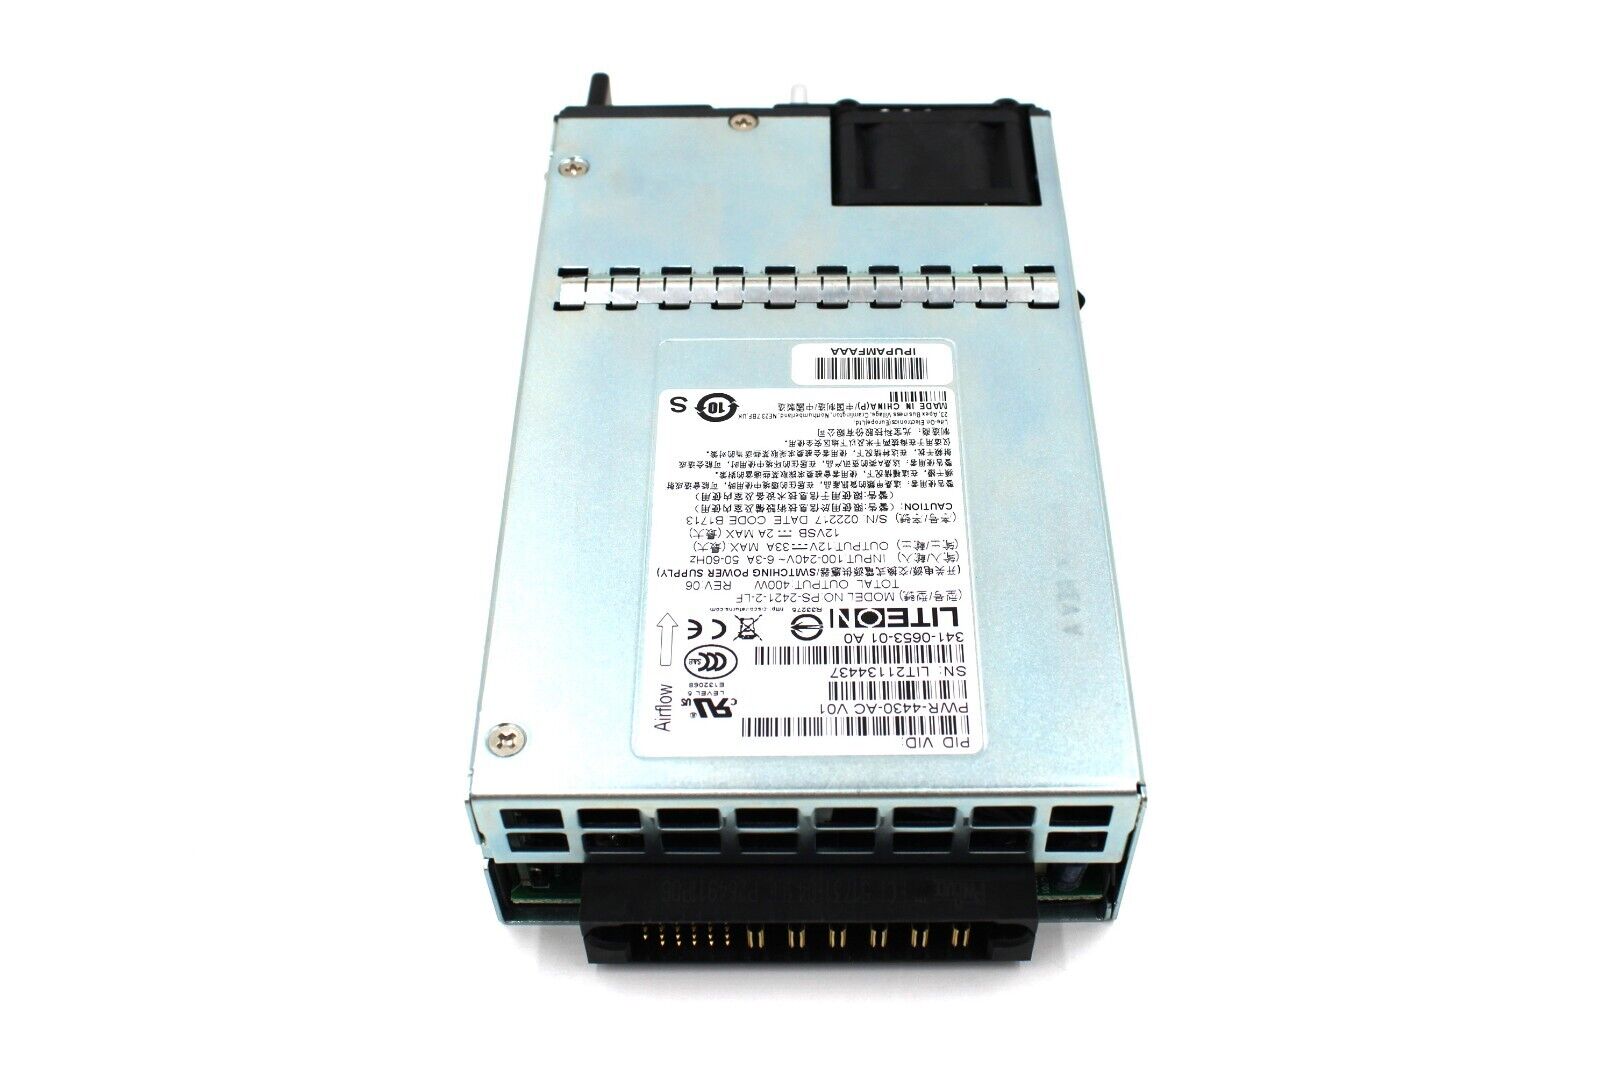 LITEON Cisco PWR-4430-AC 341-0653-01 400W Power Supply For ISR4430 Series Router